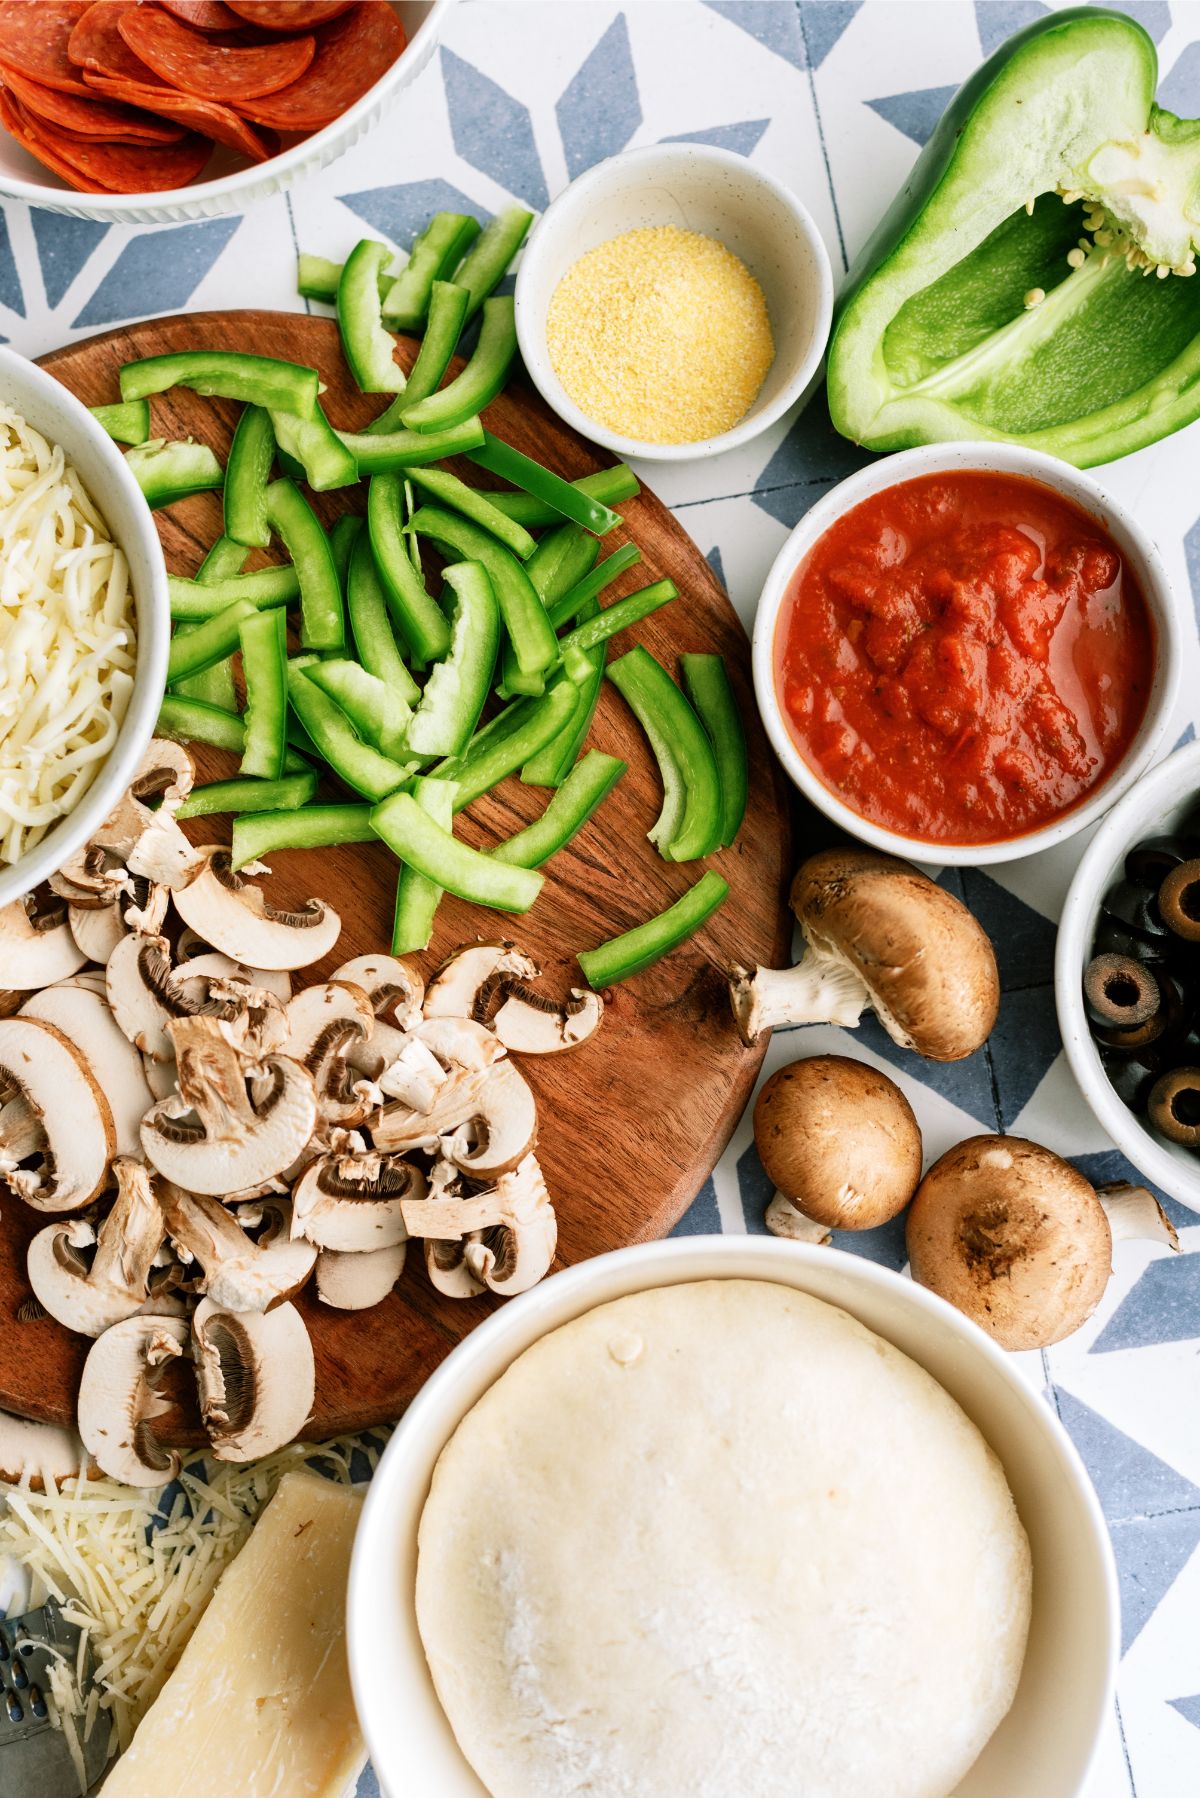 Ingredients needed to make Slow Cooker Deep Dish Pizza